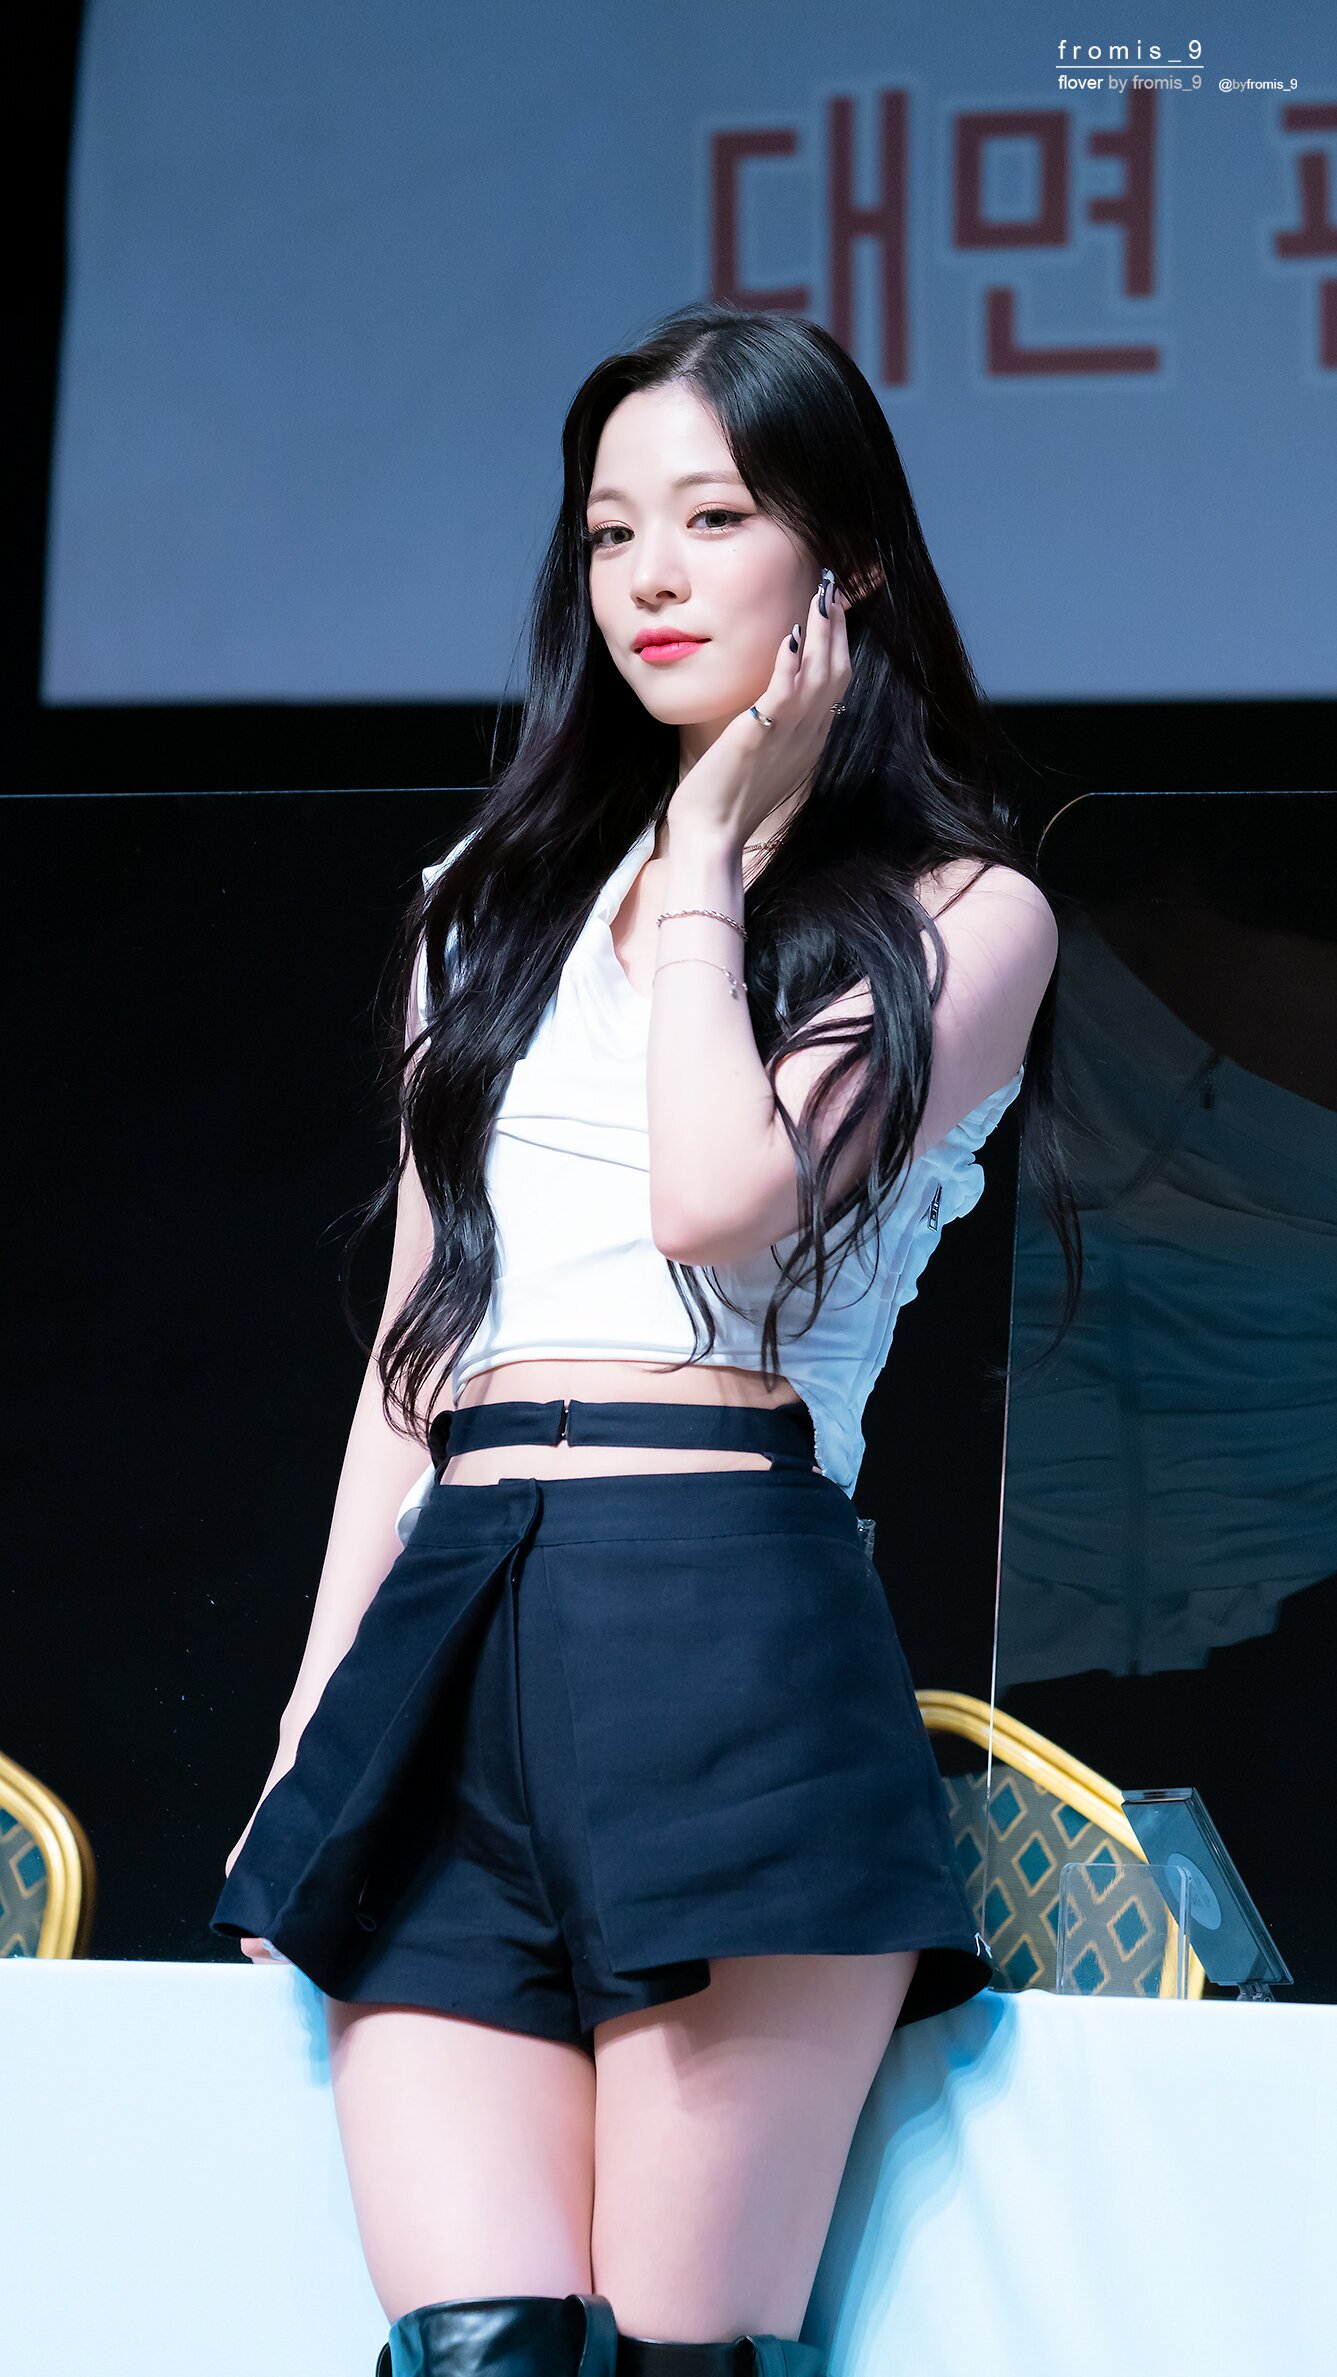 Fromis_9 chaeyoung fromis_9 Members